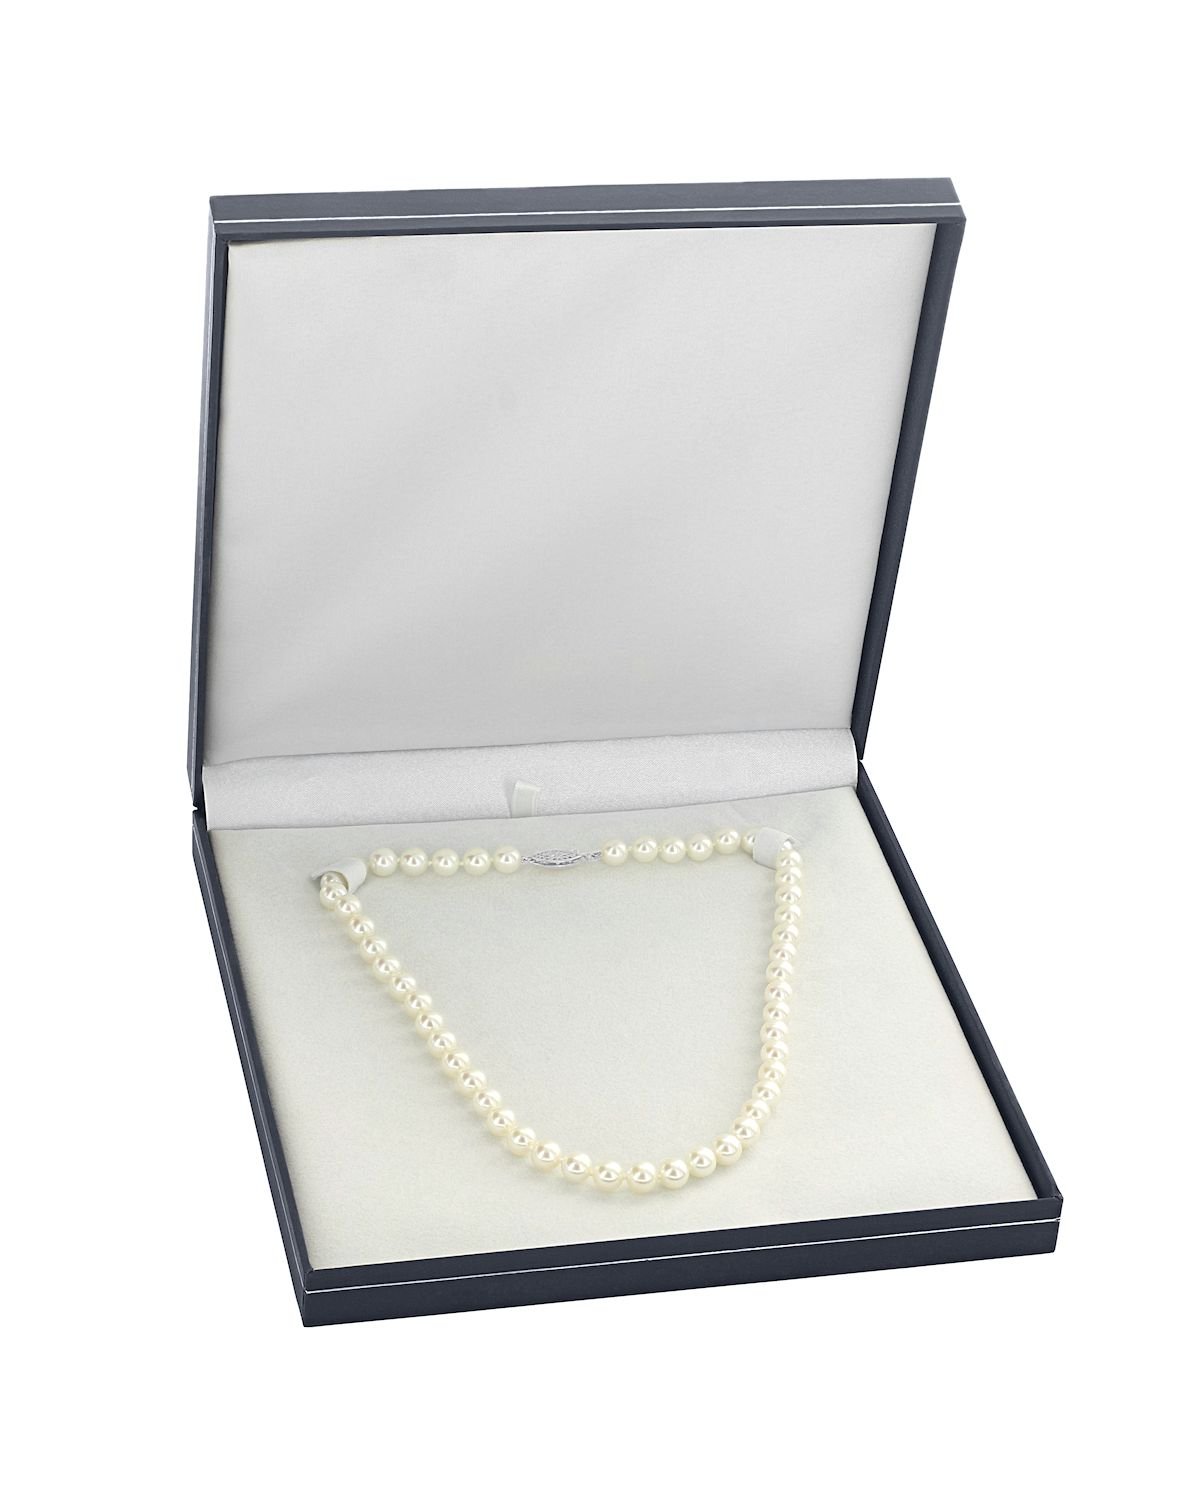 8-10mm Japanese Akoya White Pearl Necklace - AAA Quality - Third Image